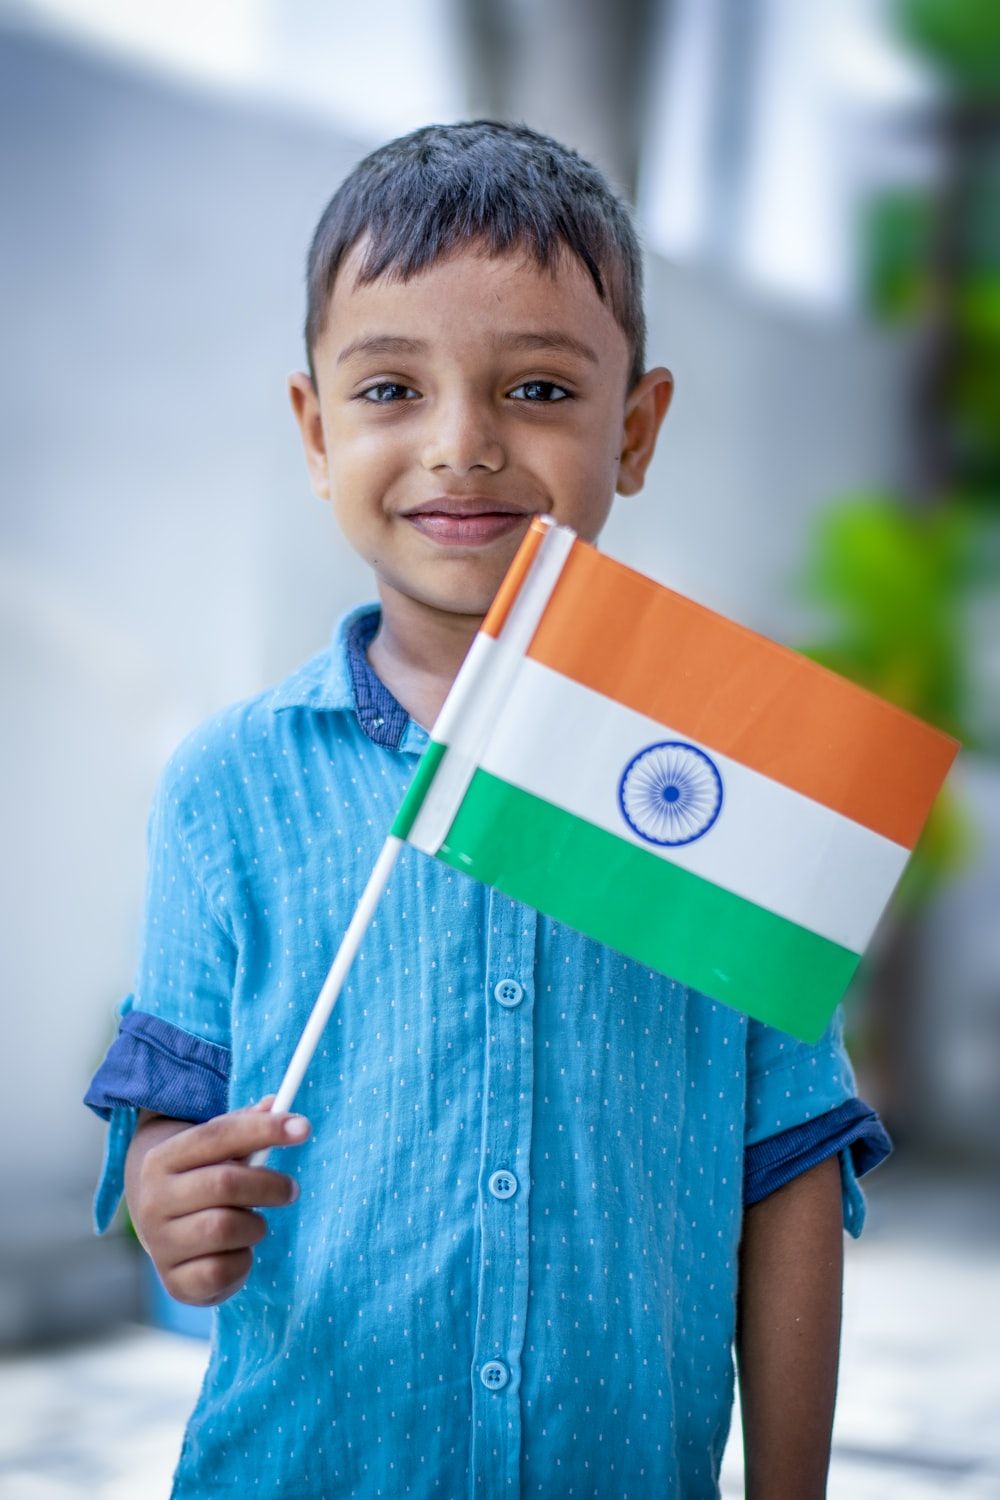 Indian Boy Picture. Download Free Image